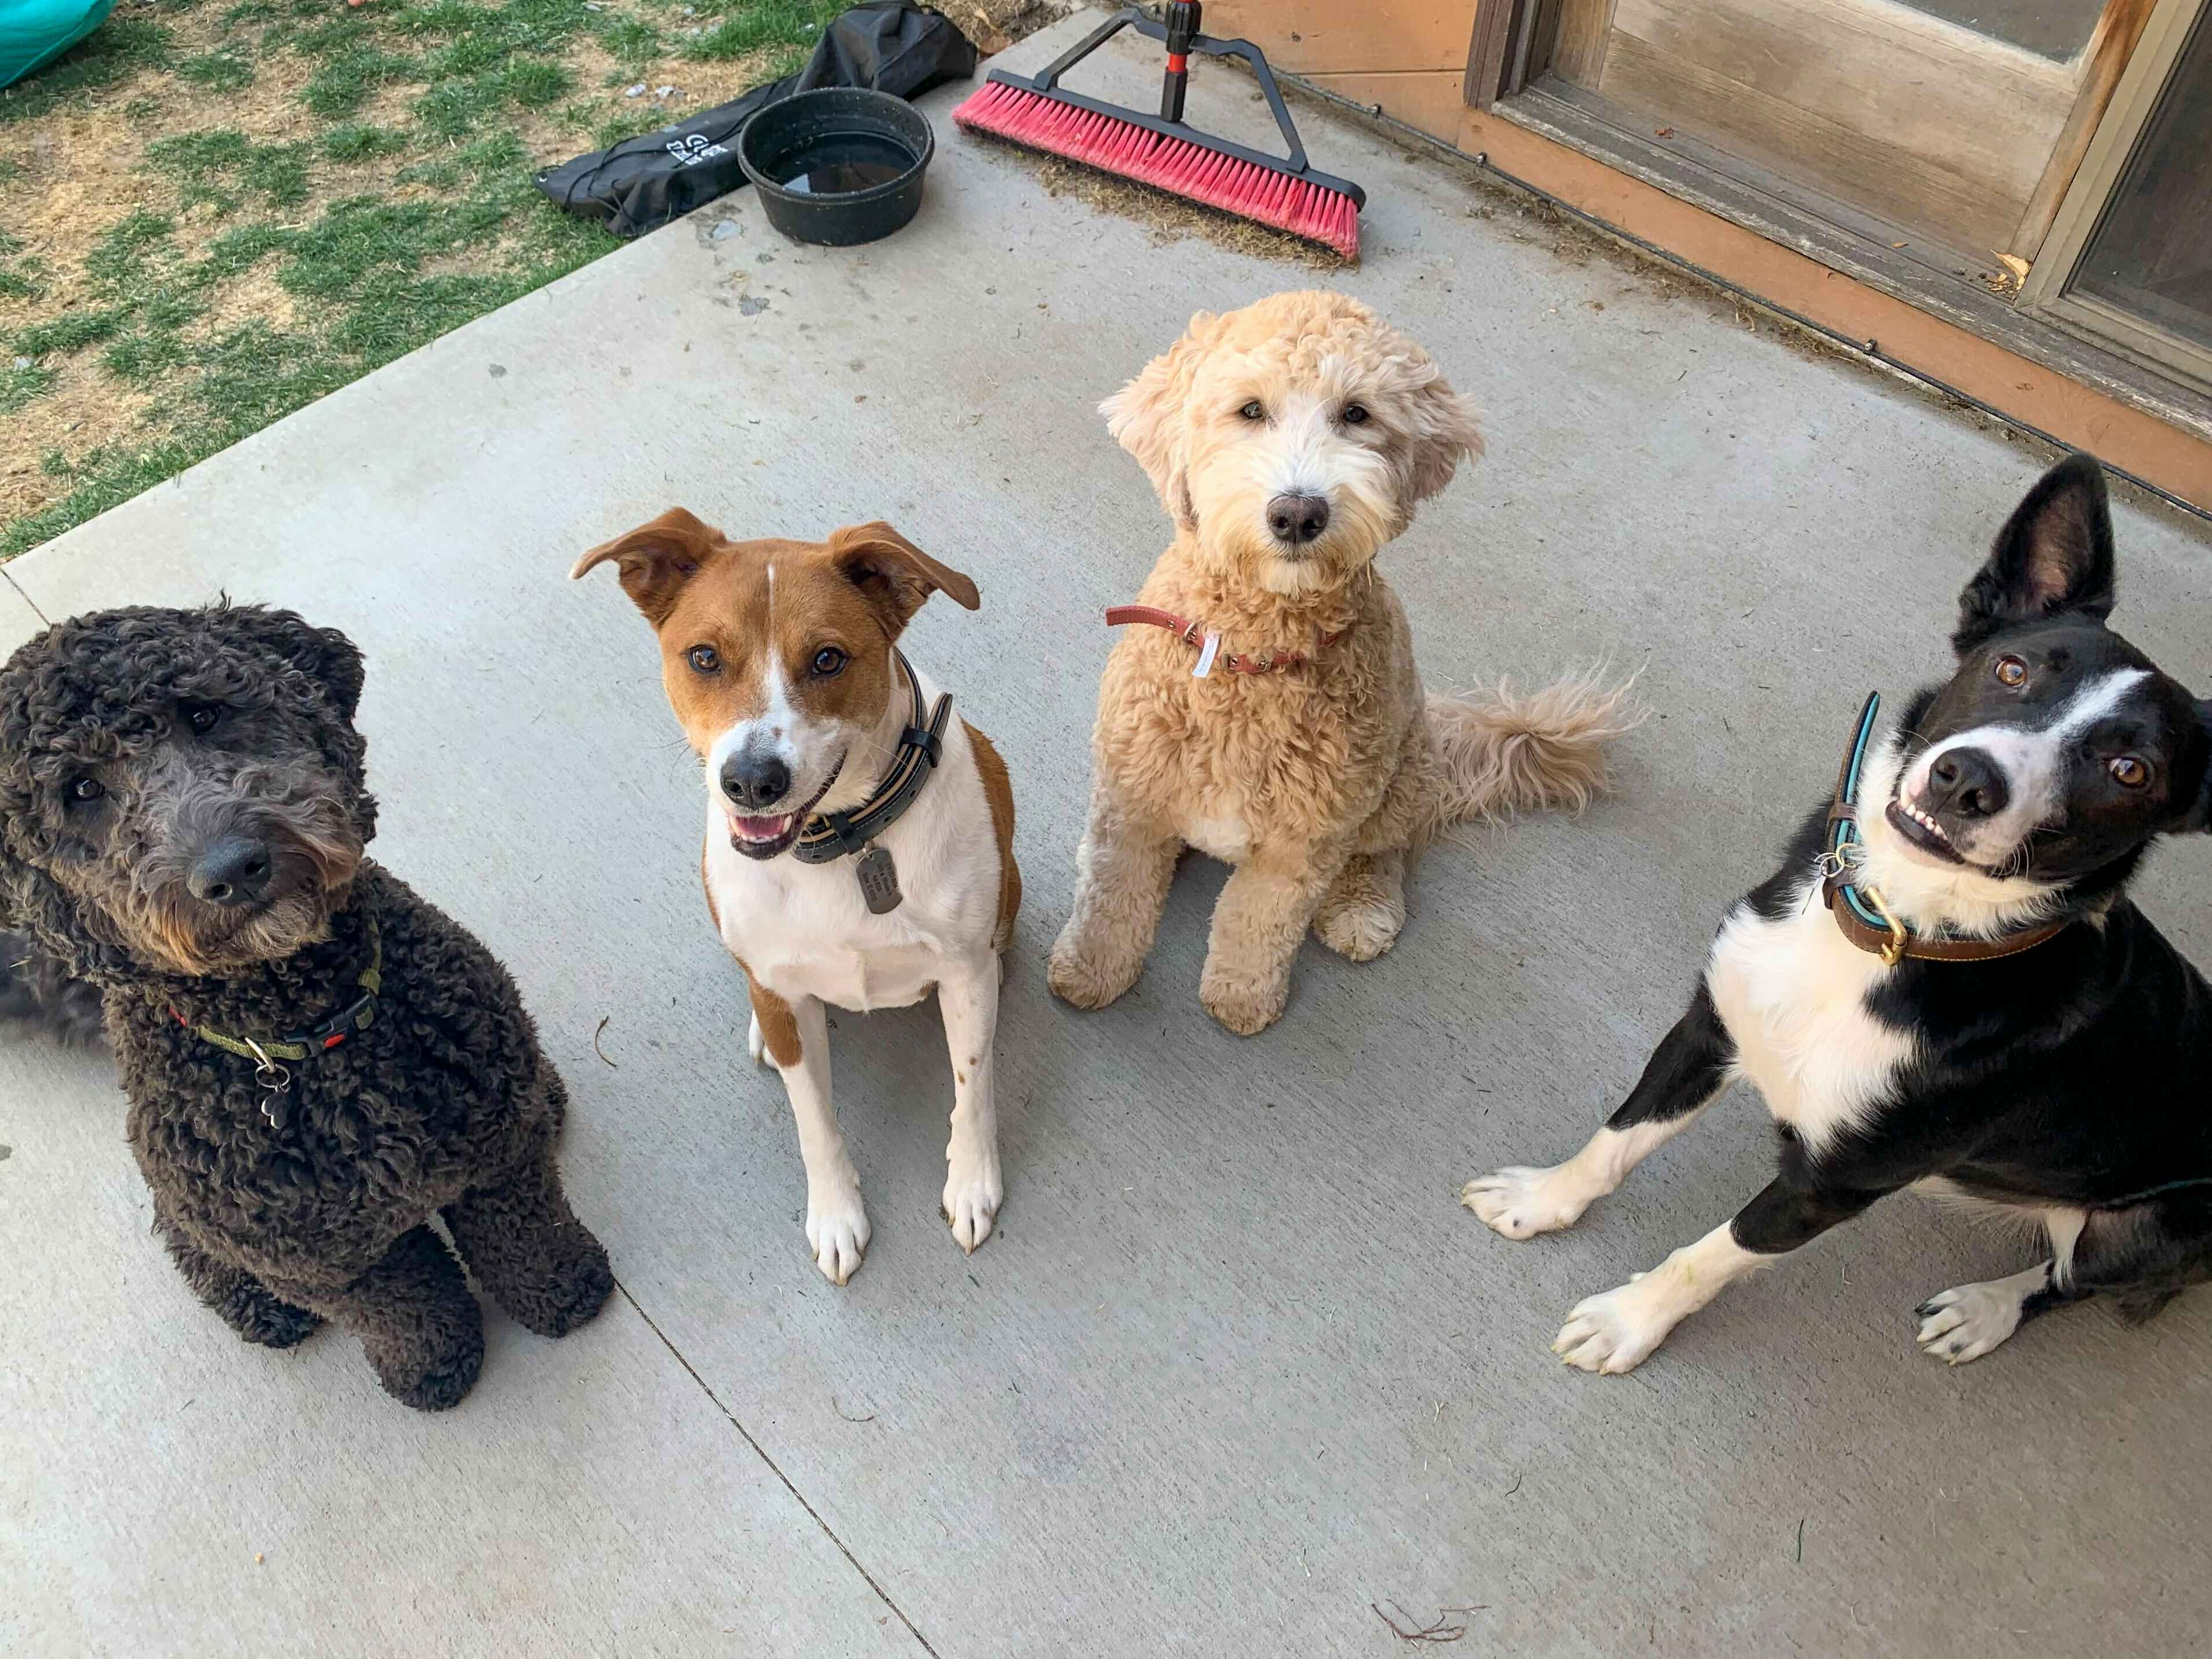 4 dogs sitting on a cement patio looking up at the camera. All 4 dogs are different breeds.